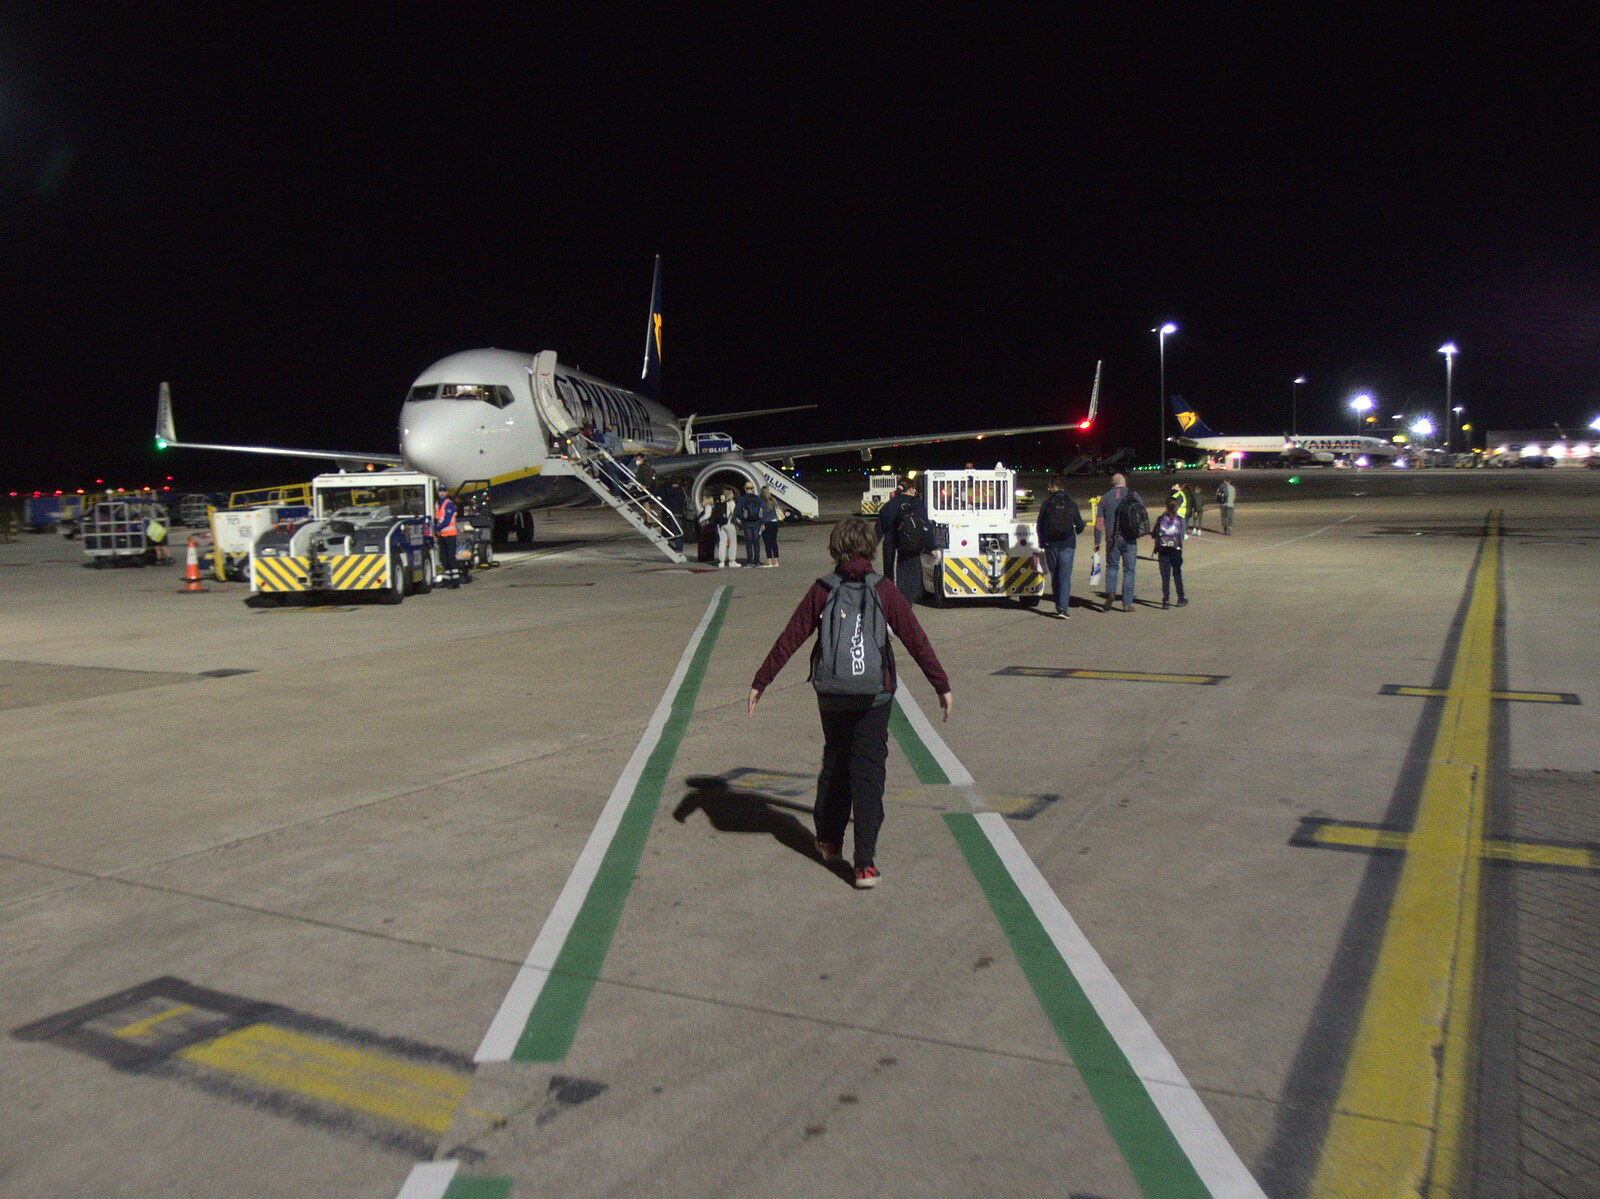 Fred becomes a plane from Five Days in Lanzarote, Canary Islands, Spain - 24th October 2021